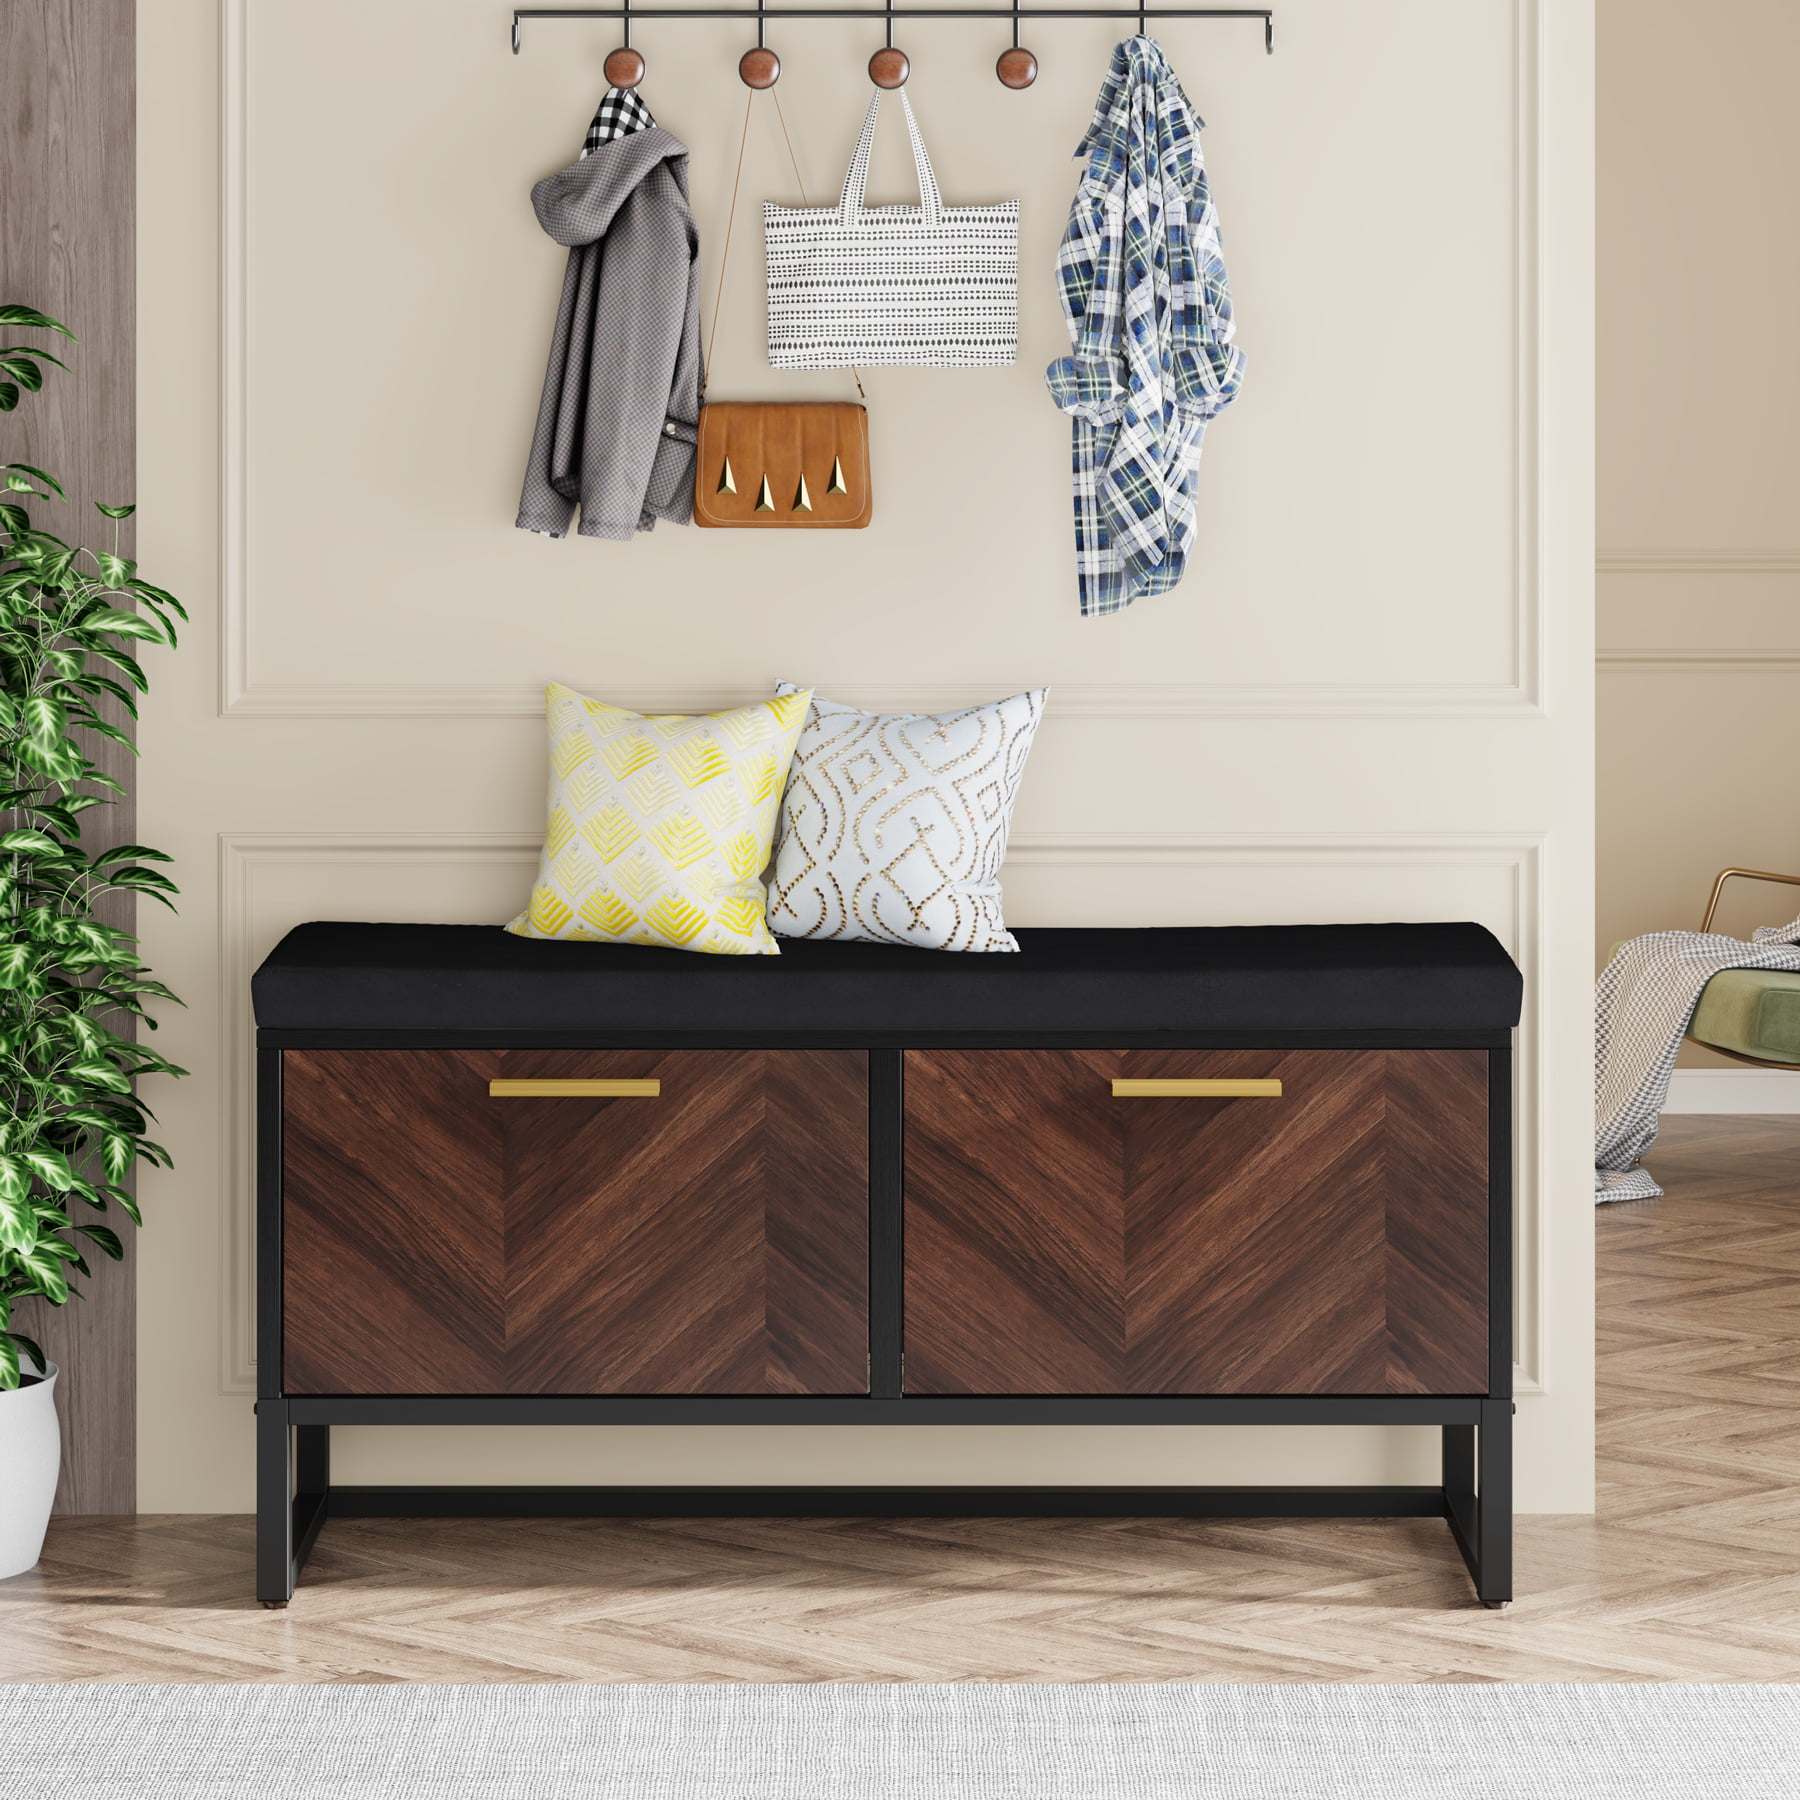 Real Living Tribeca Shoe Storage Entryway Bench